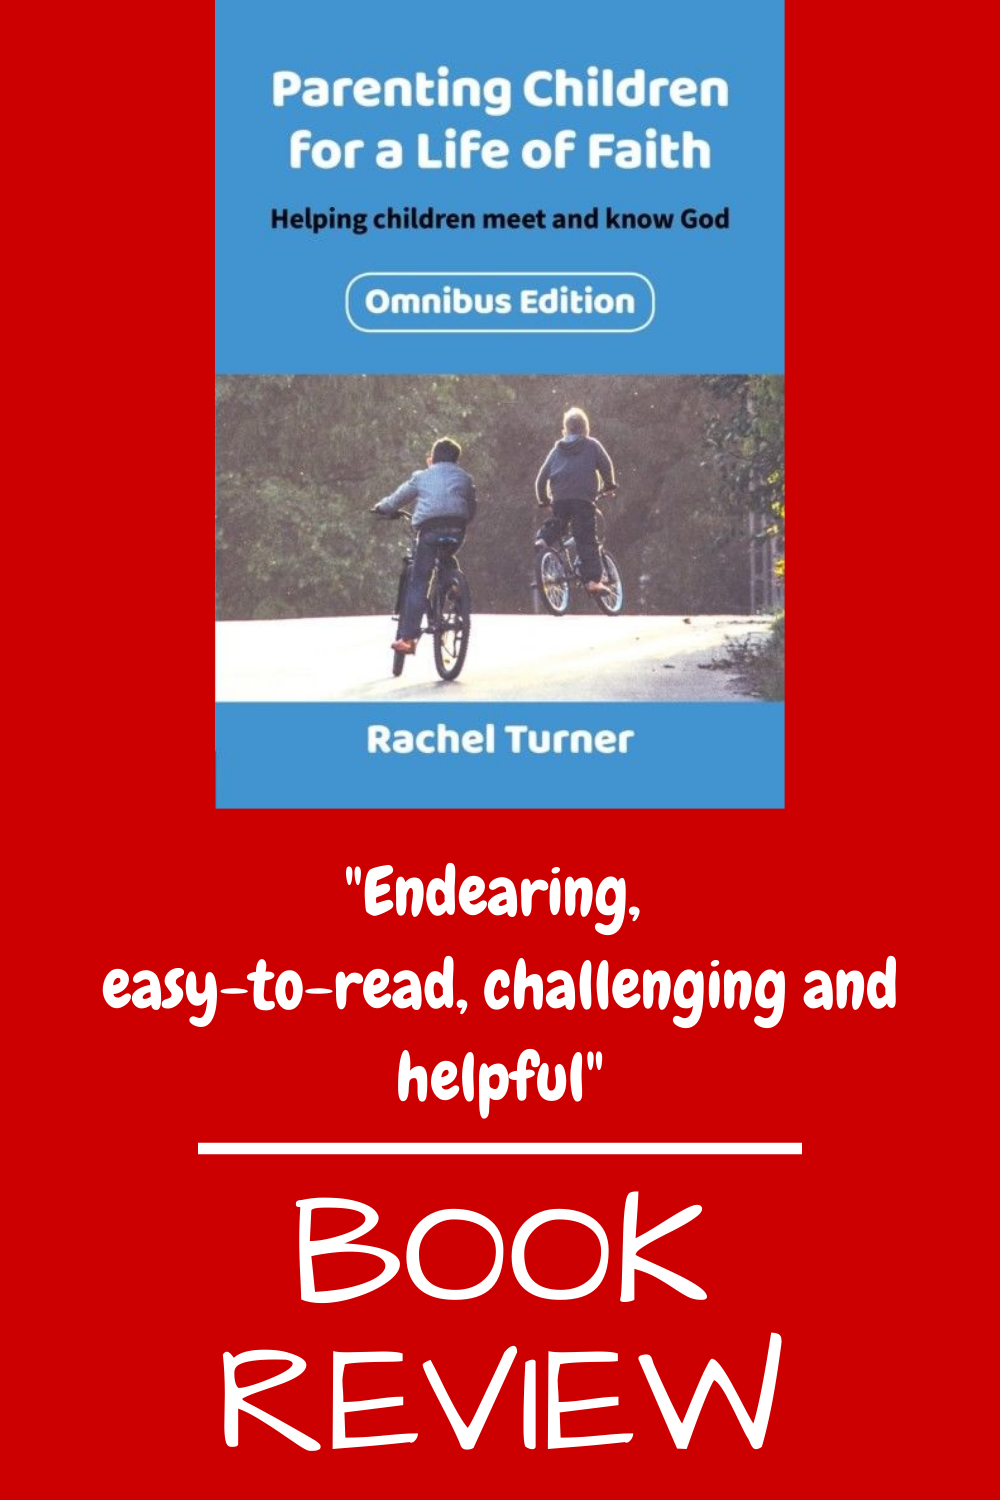 Parenting children for a life of faith by Rachel Turner (BRF). Book review from a Christian parent of four.